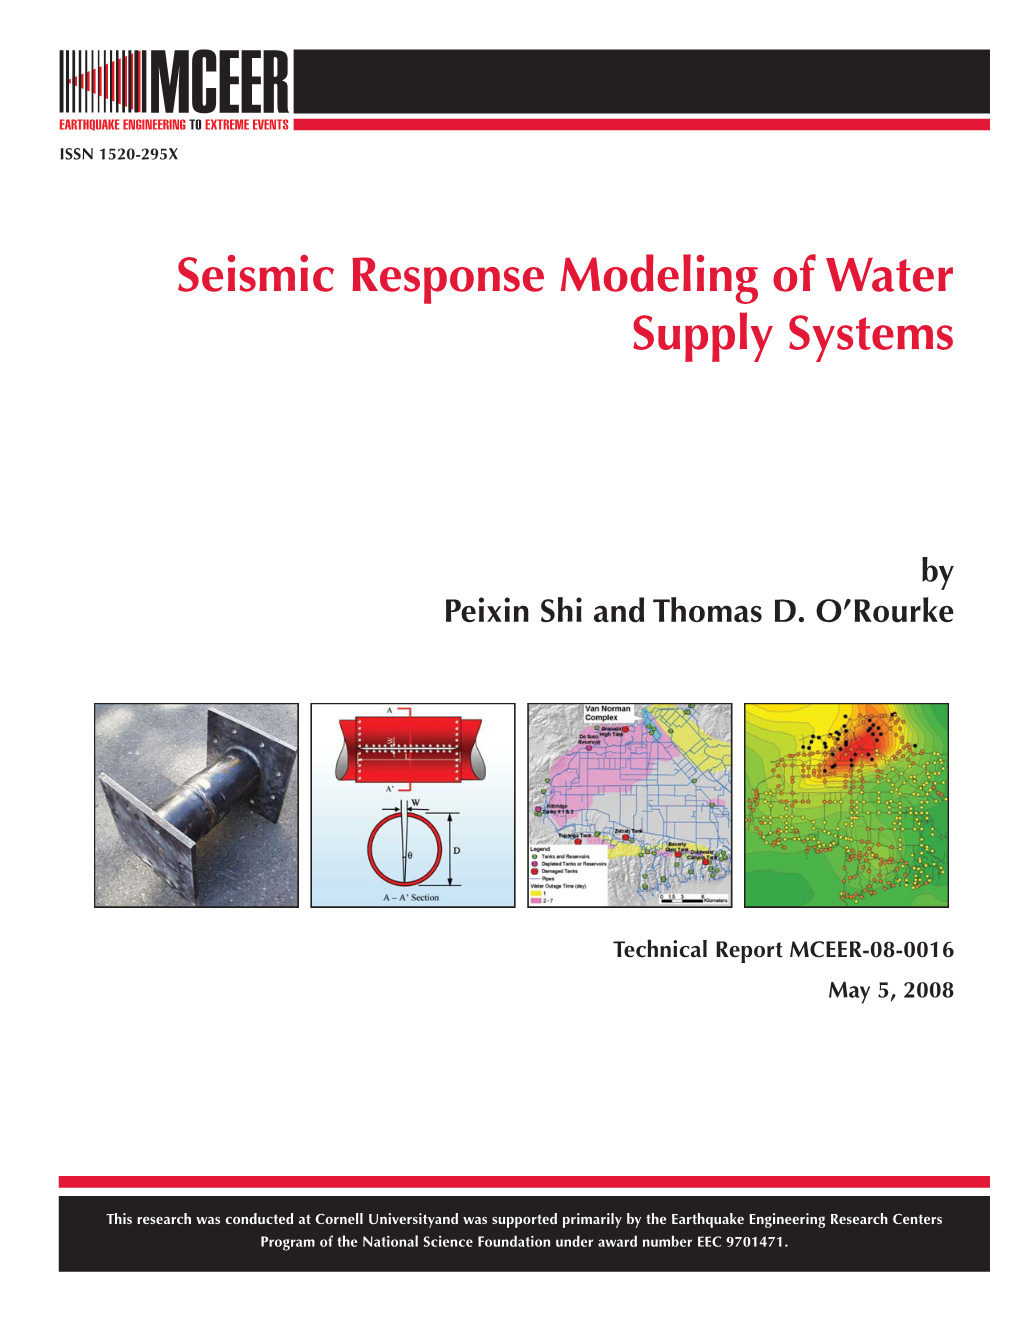 Seismic Response Modeling of Water Supply Systems